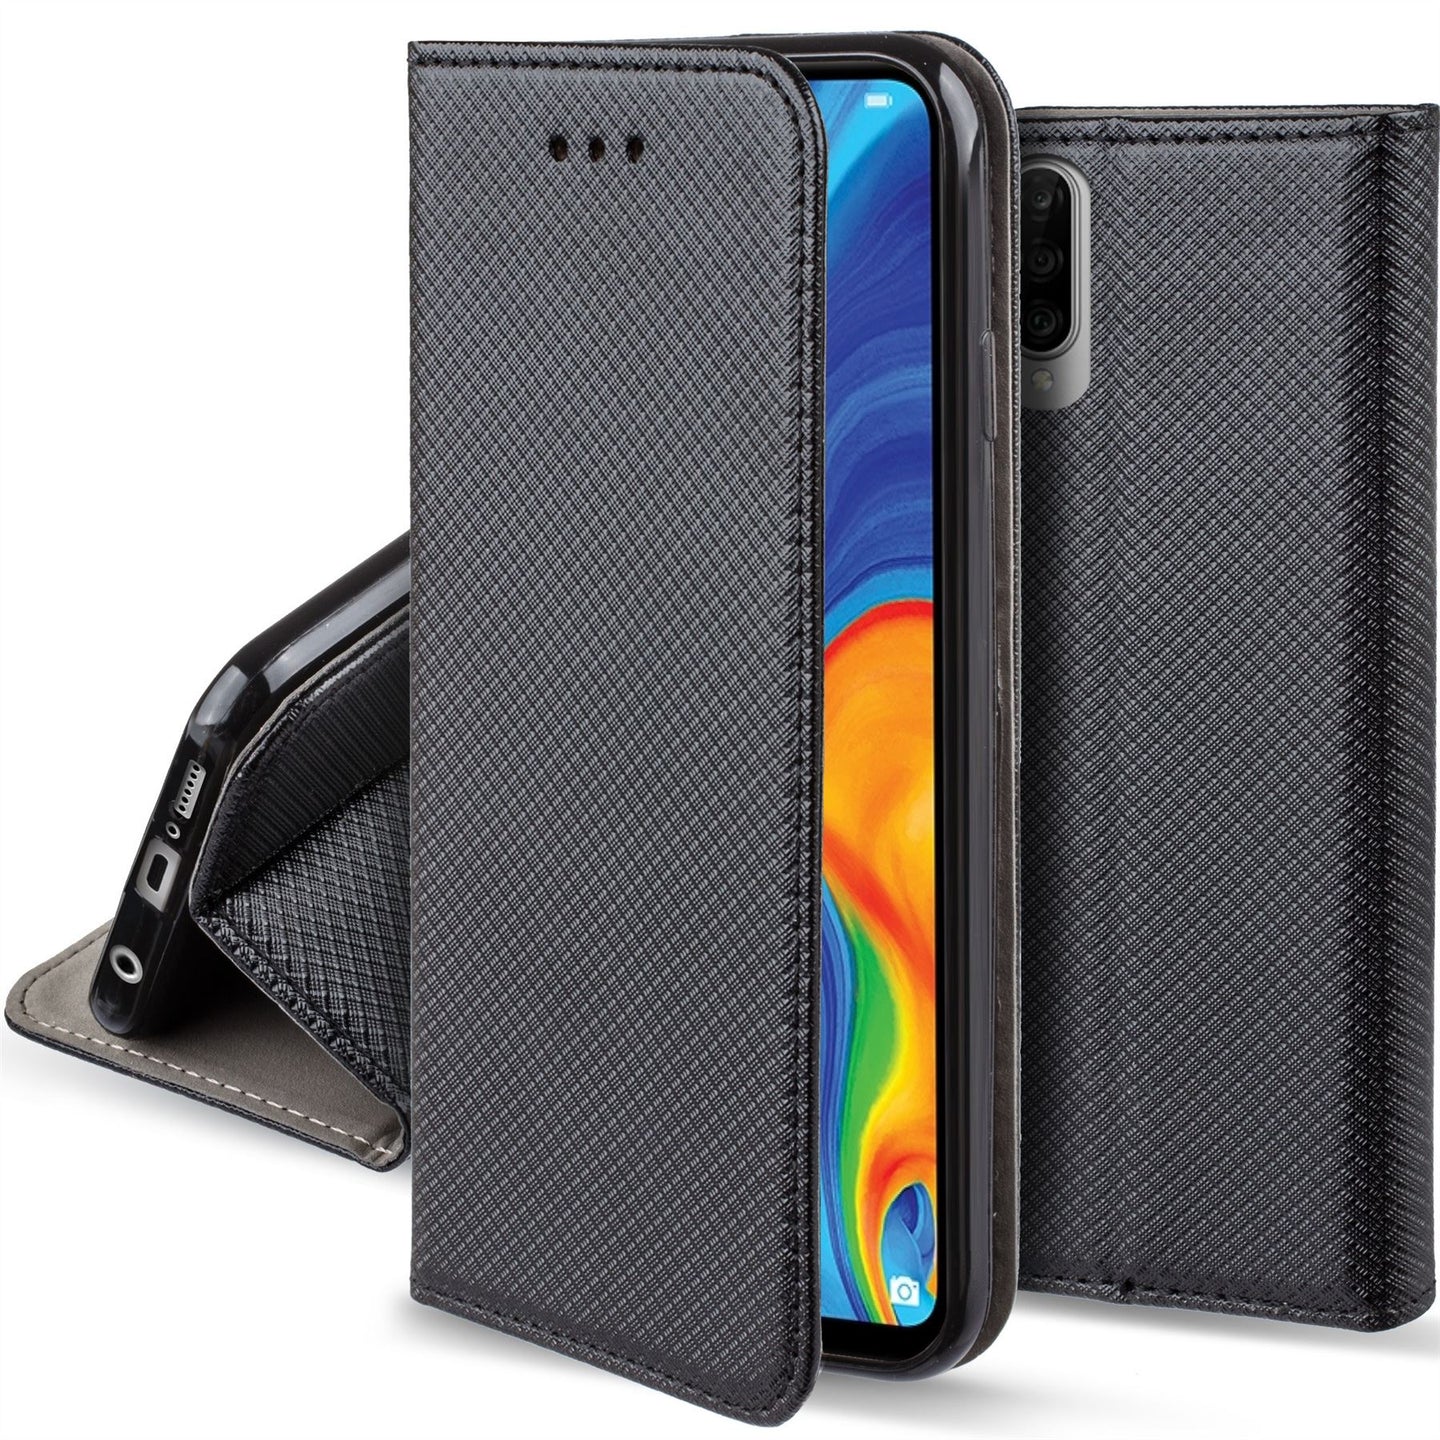 Moozy Case Flip Cover for Huawei P30 Lite, Black - Smart Magnetic Flip Case with Card Holder and Stand